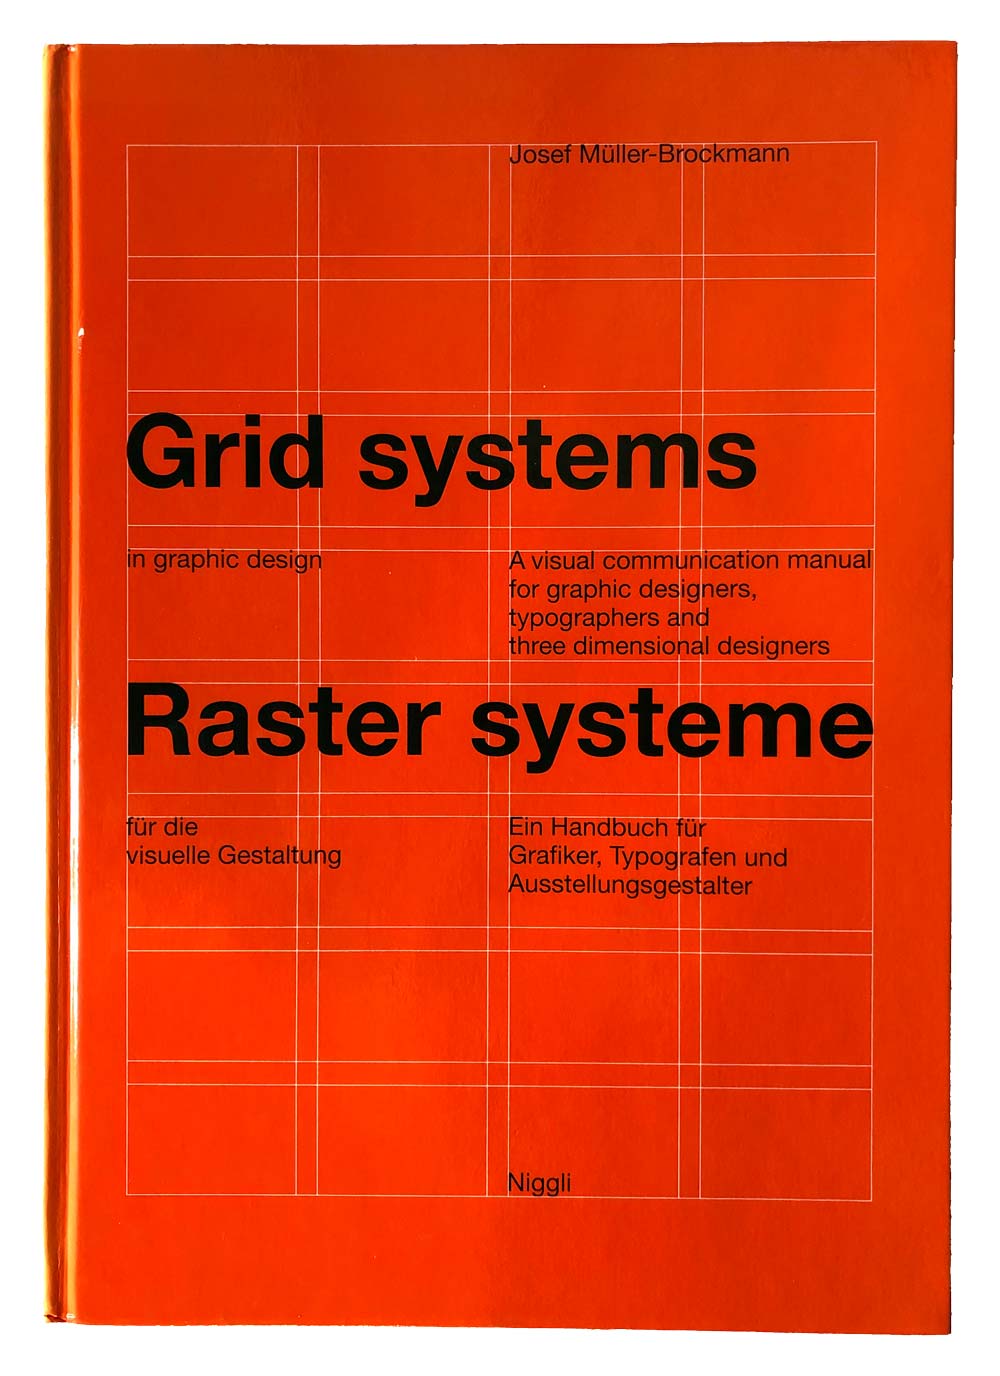 Orange book cover of Grid systems in graphic design.